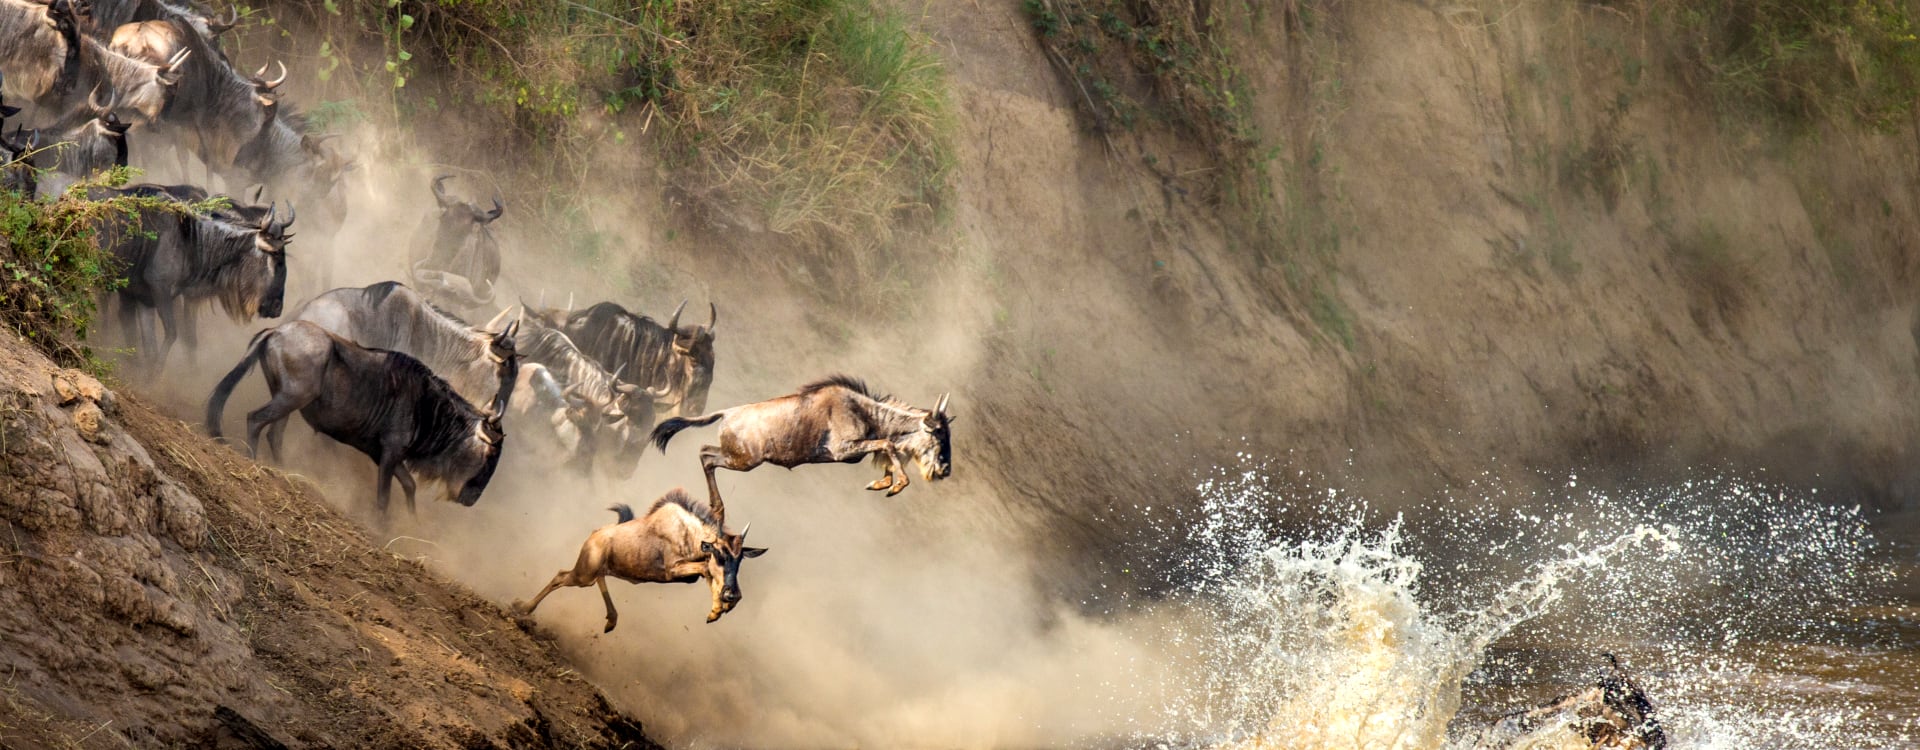 River Crossing | Sassabi Expeditions